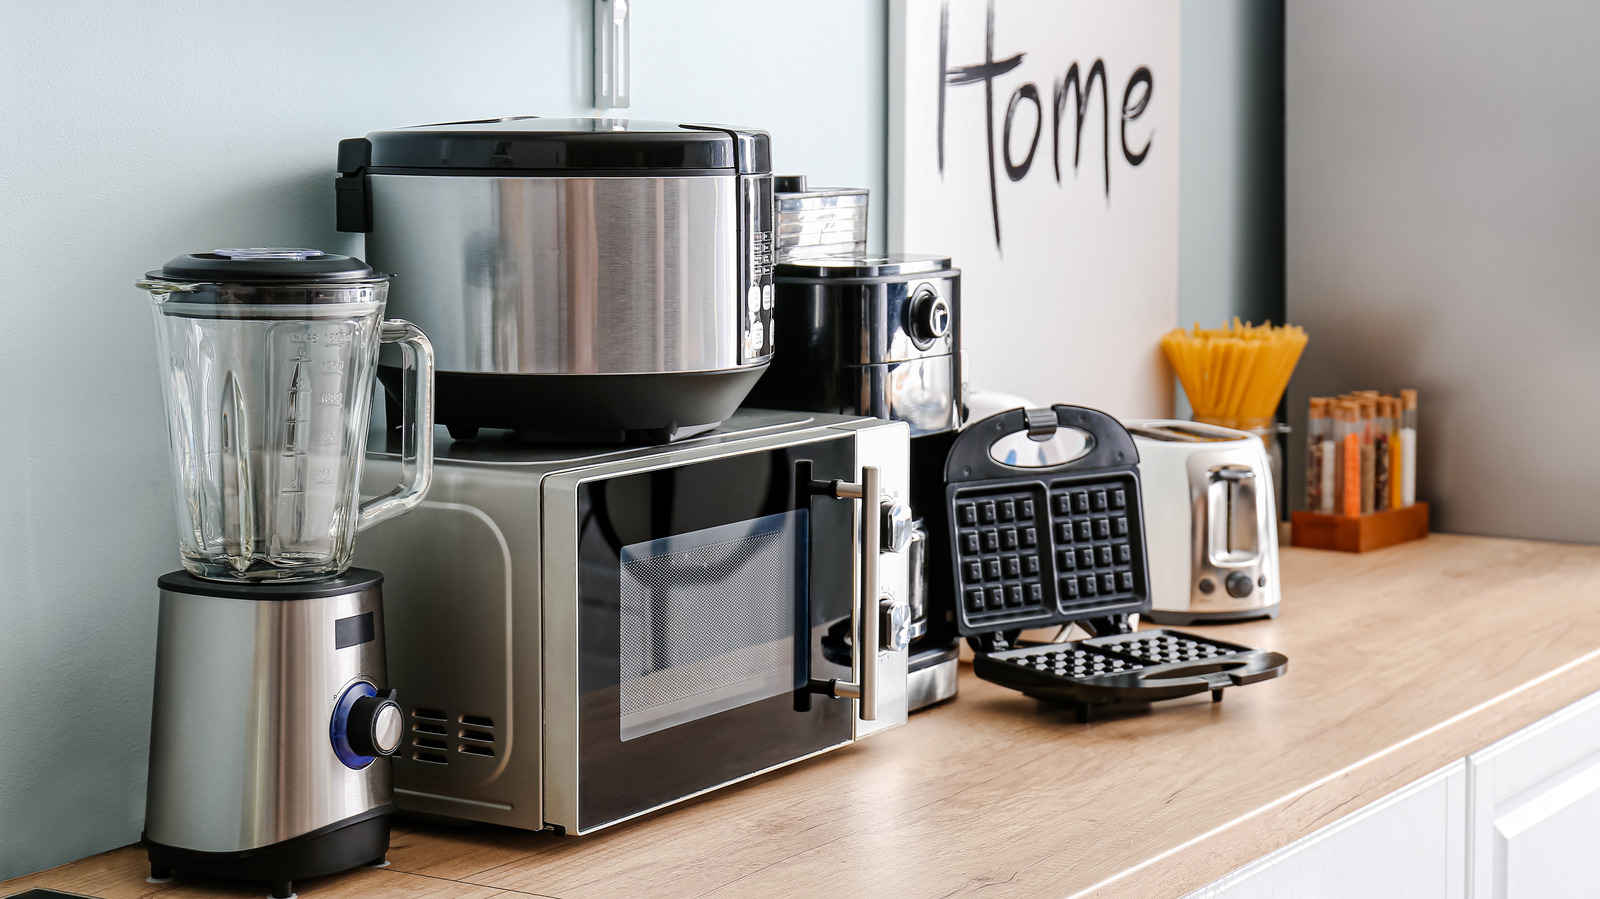 More Than 50% Of People Agree This Kitchen Appliance Is The Most